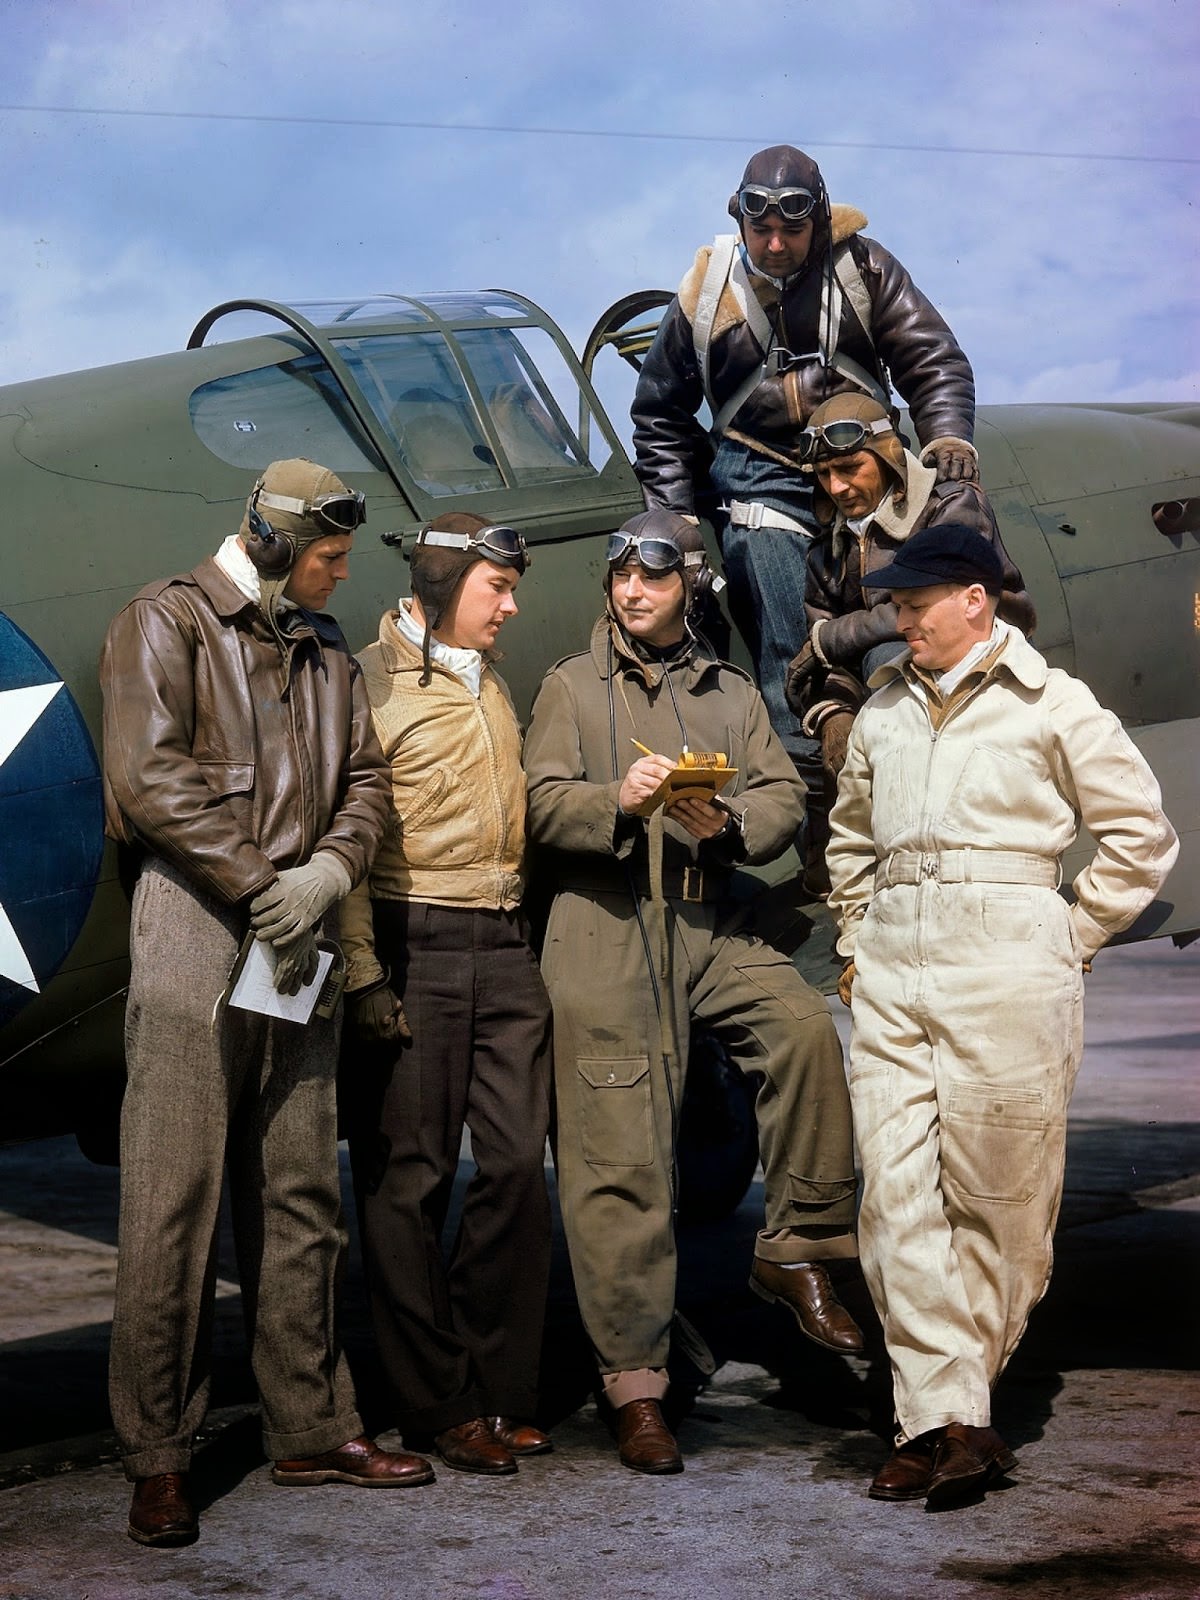 Curtiss Wright's chief test pilot H. Lloyd Child (center) writes on a clipboard as he stands with other pilots on a tarmac near the companies manufacturing plant, Buffalo, New York, 1941.